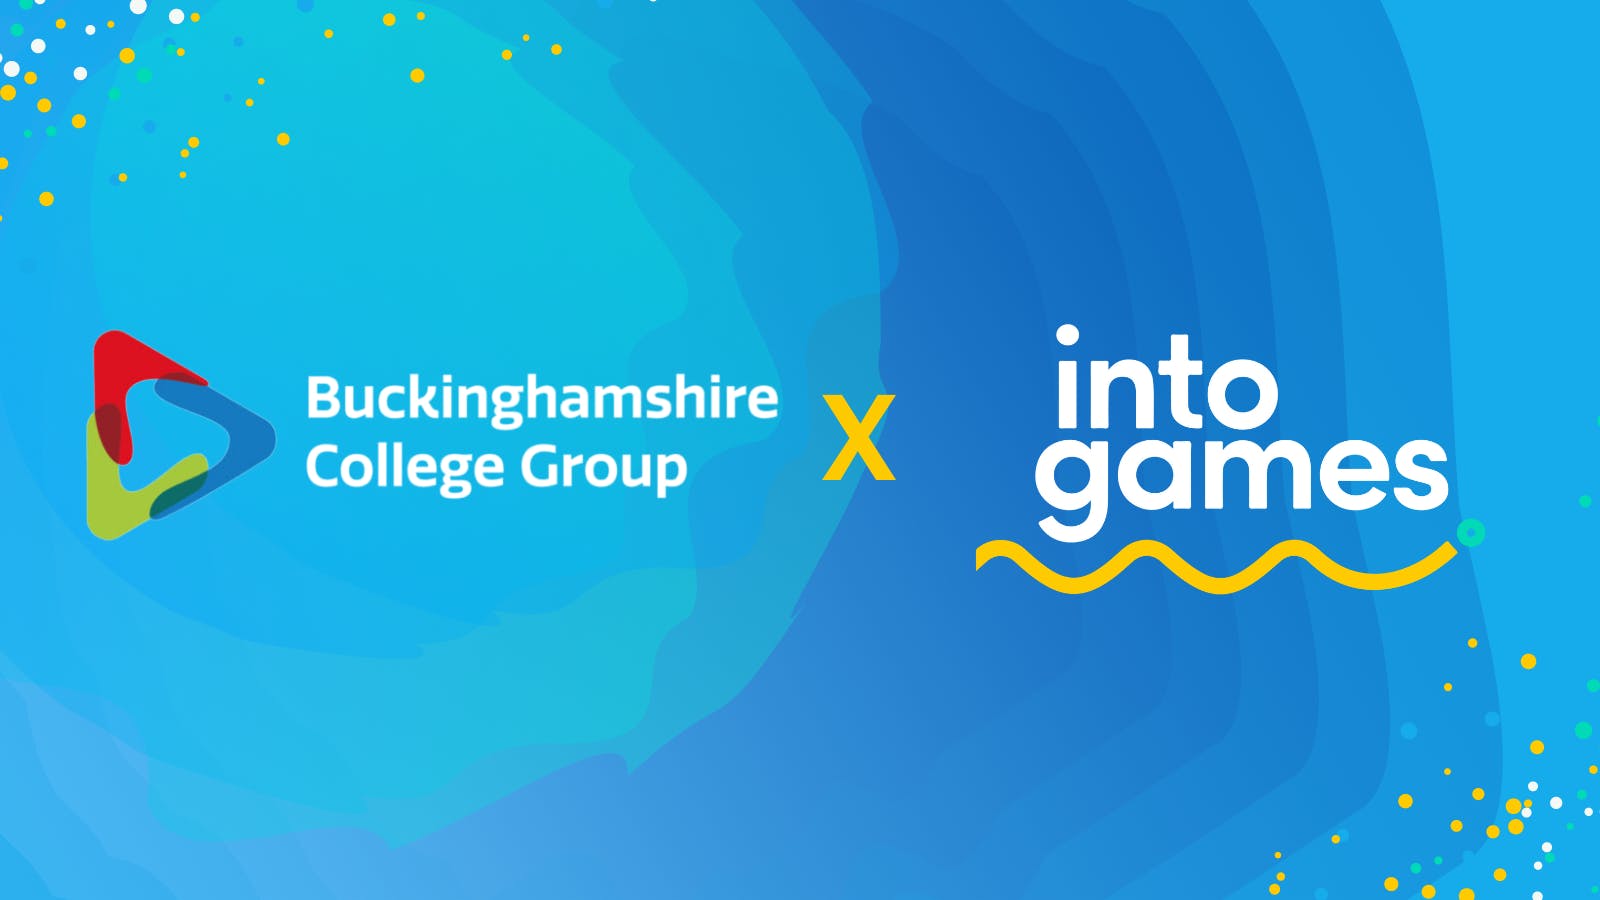 Buckinghamshire College Group are Into Games Partners